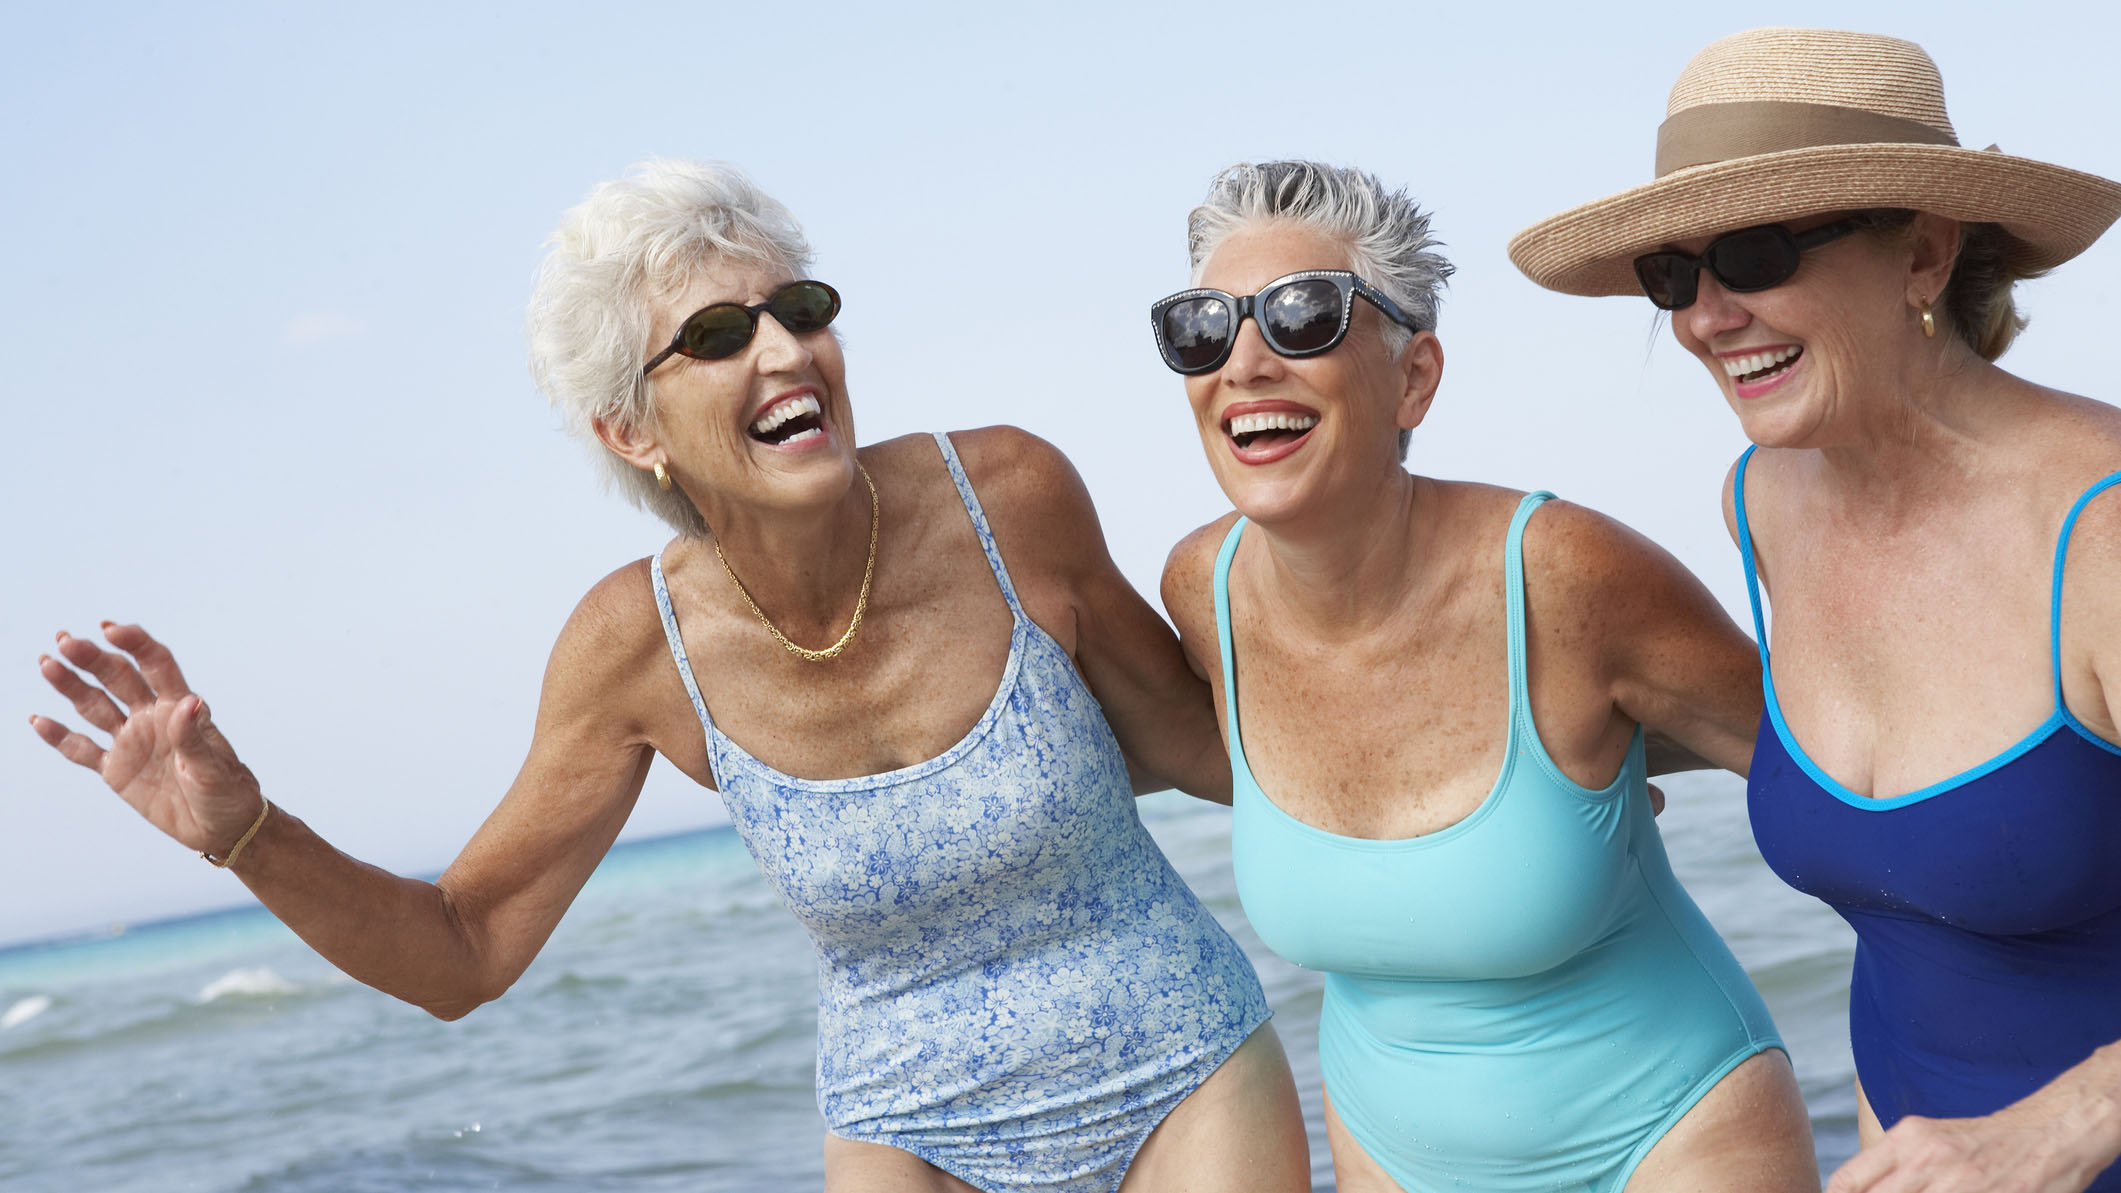 Swimsuits For Women Over 50 That Will Make You Look And Feel Great